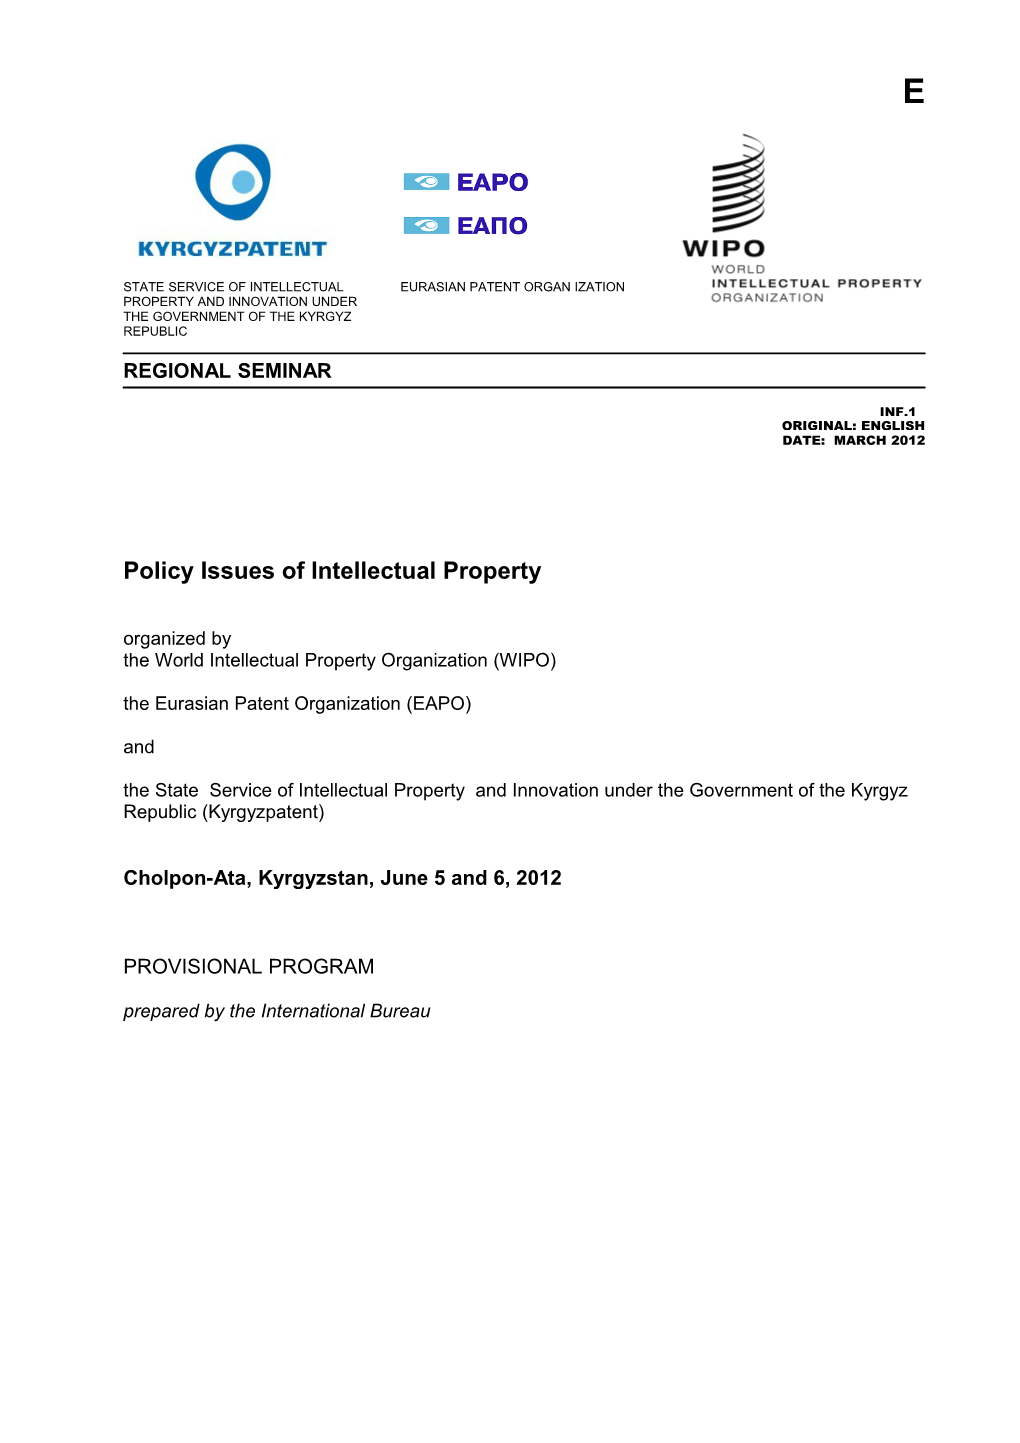 Policy Issues of Intellectual Property